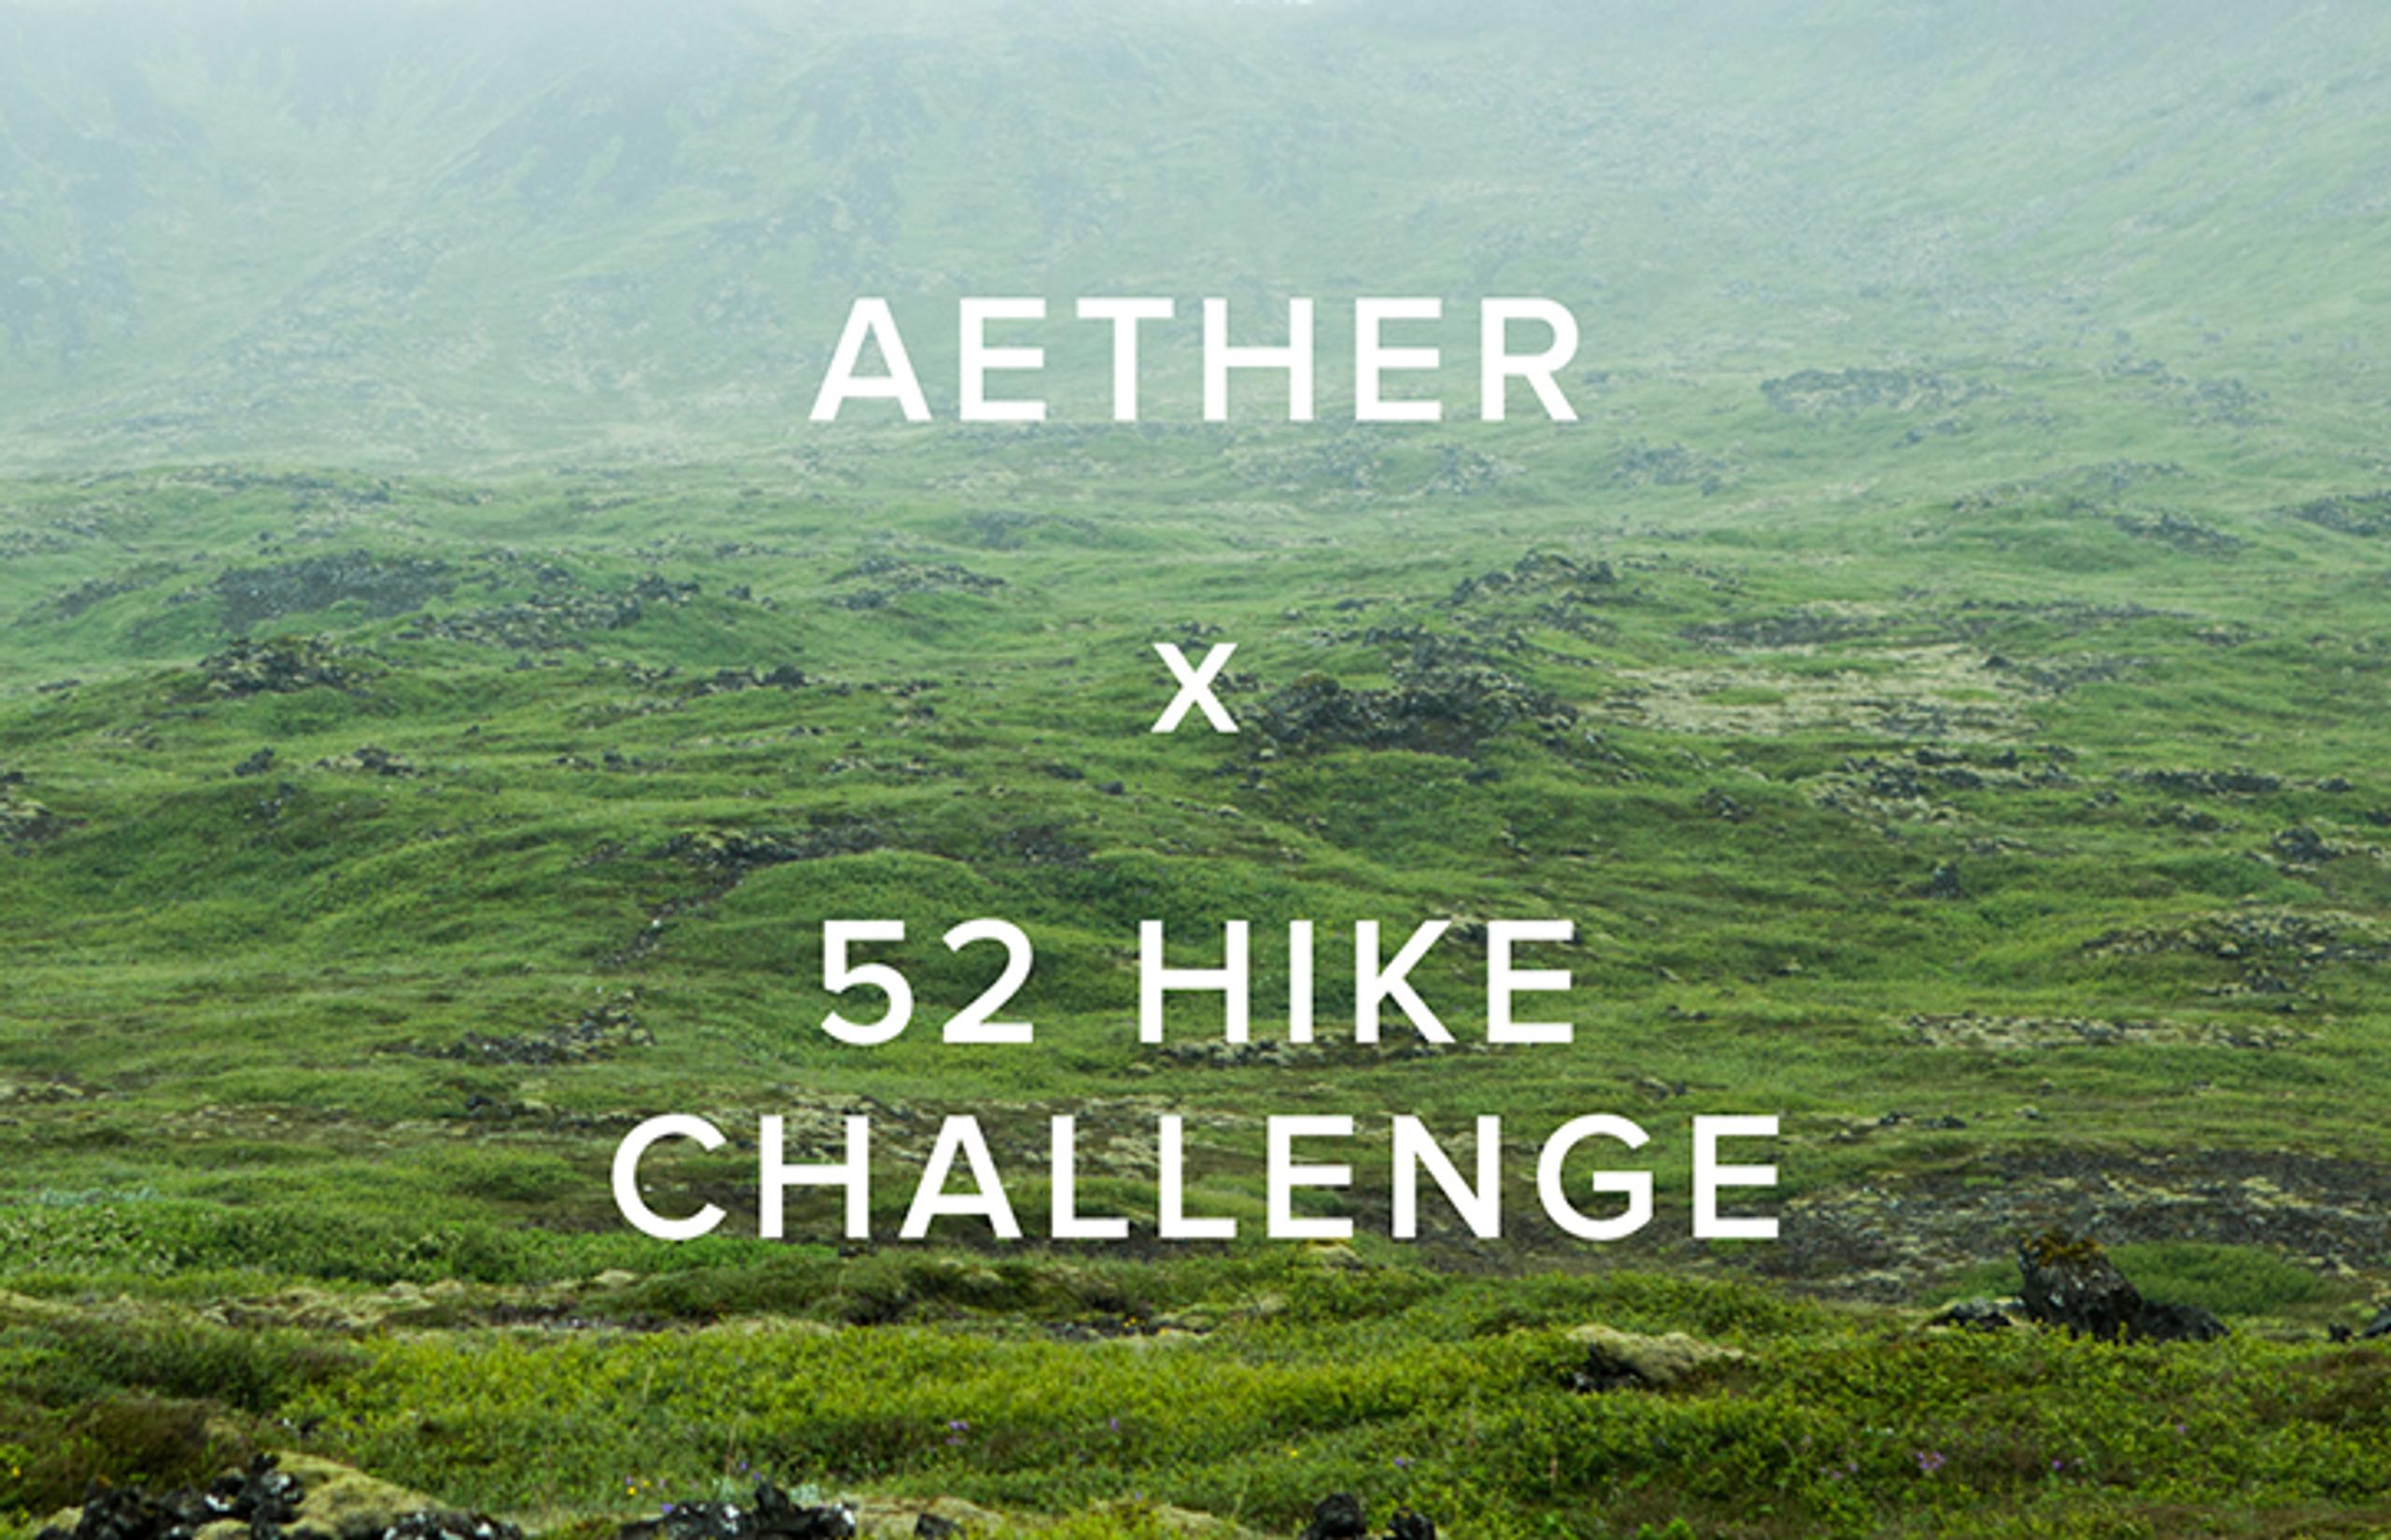 graphic reading aether x 52 hike challenge